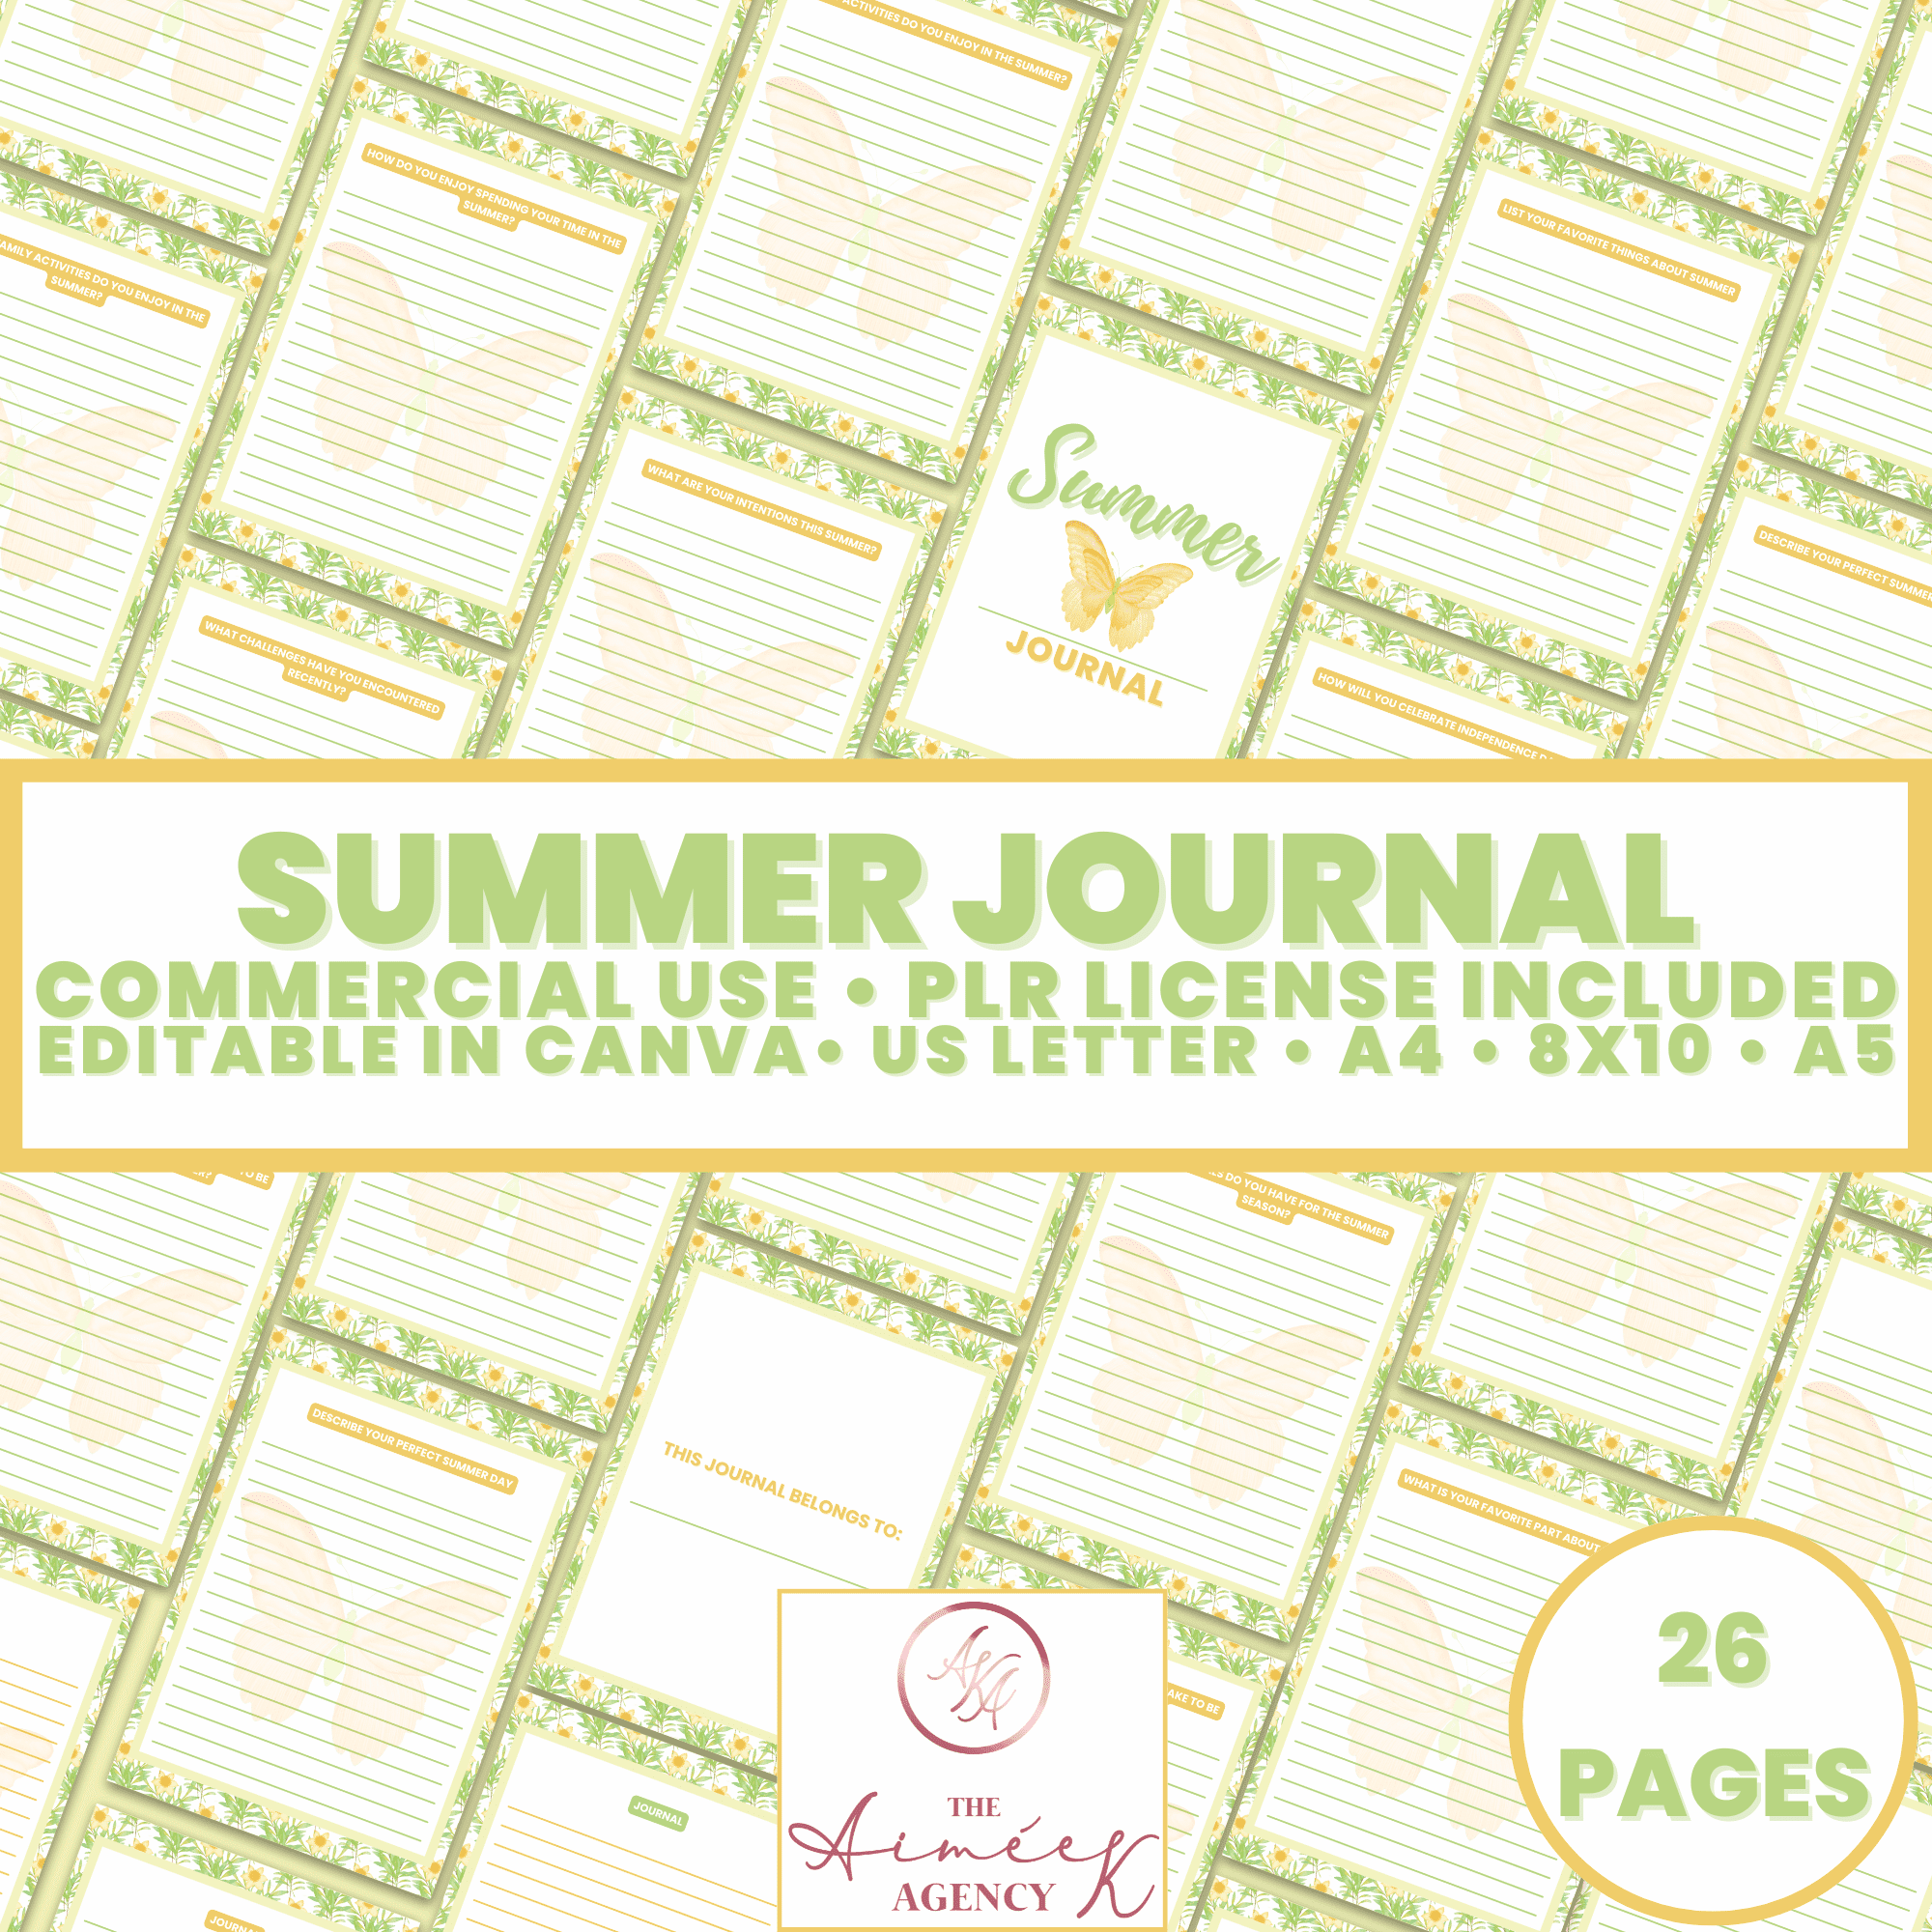 Image of a digital product titled "Summer Journal" with 26 pages. It includes commercial use rights, PLR license, and is editable in Canva. Available in US Letter, A4, 8x10, and A5 sizes.